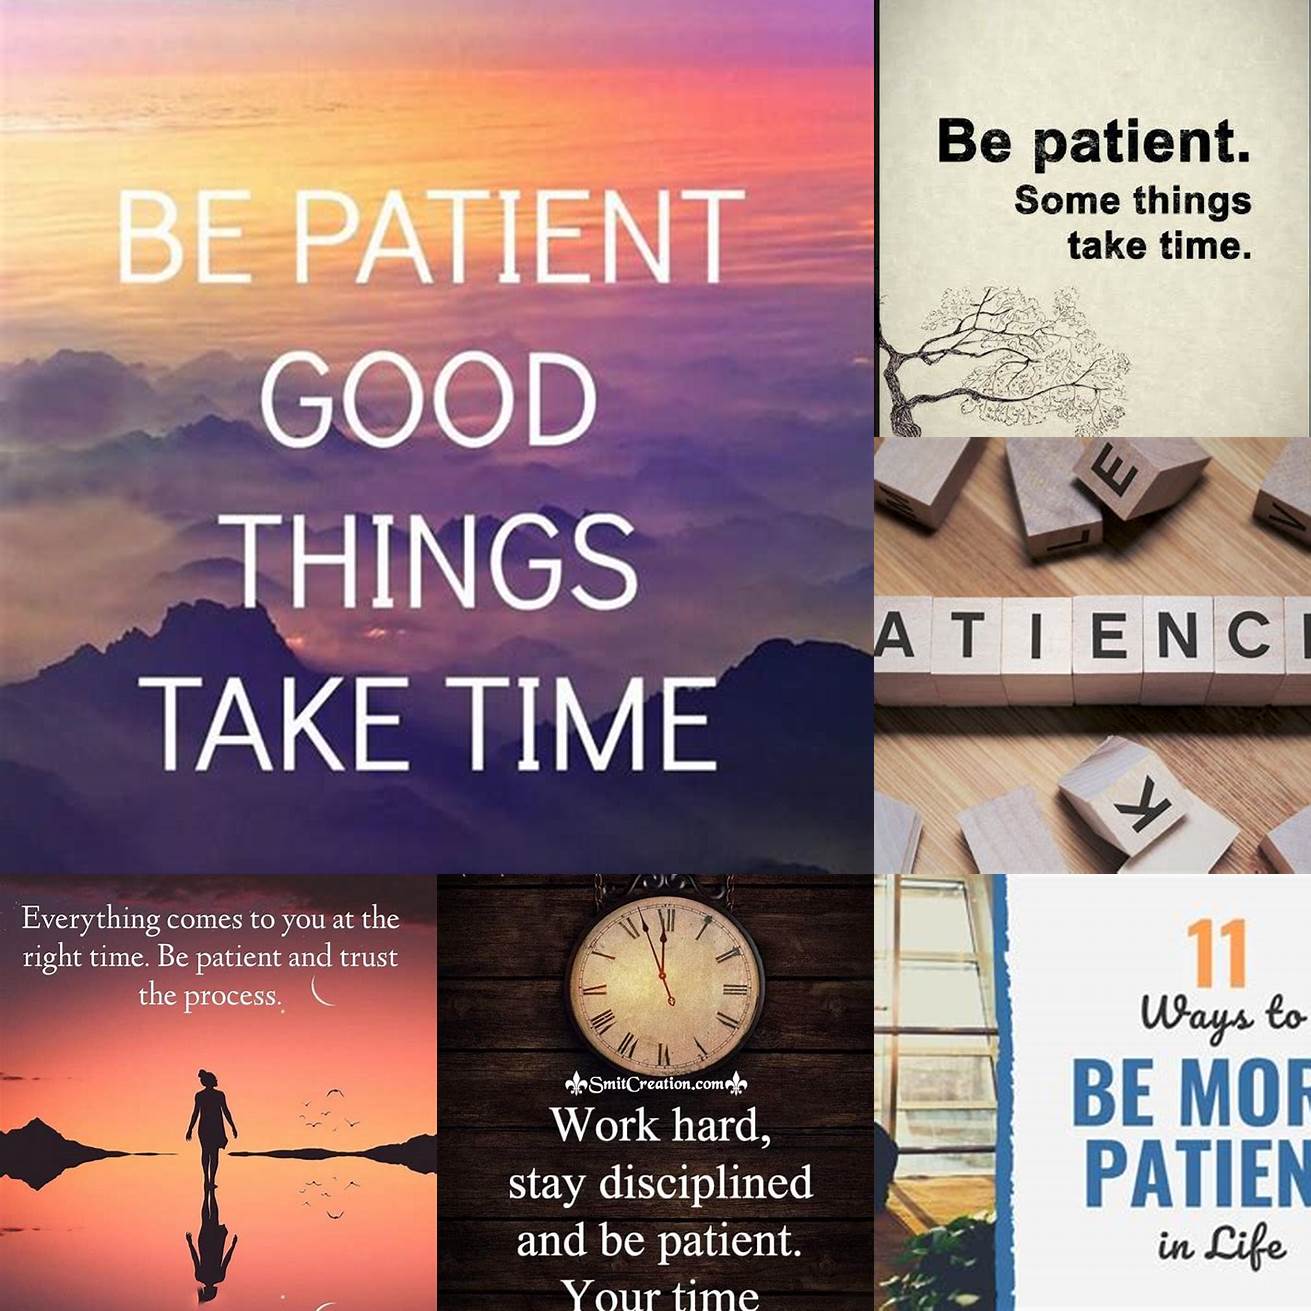 Be patient and take your time